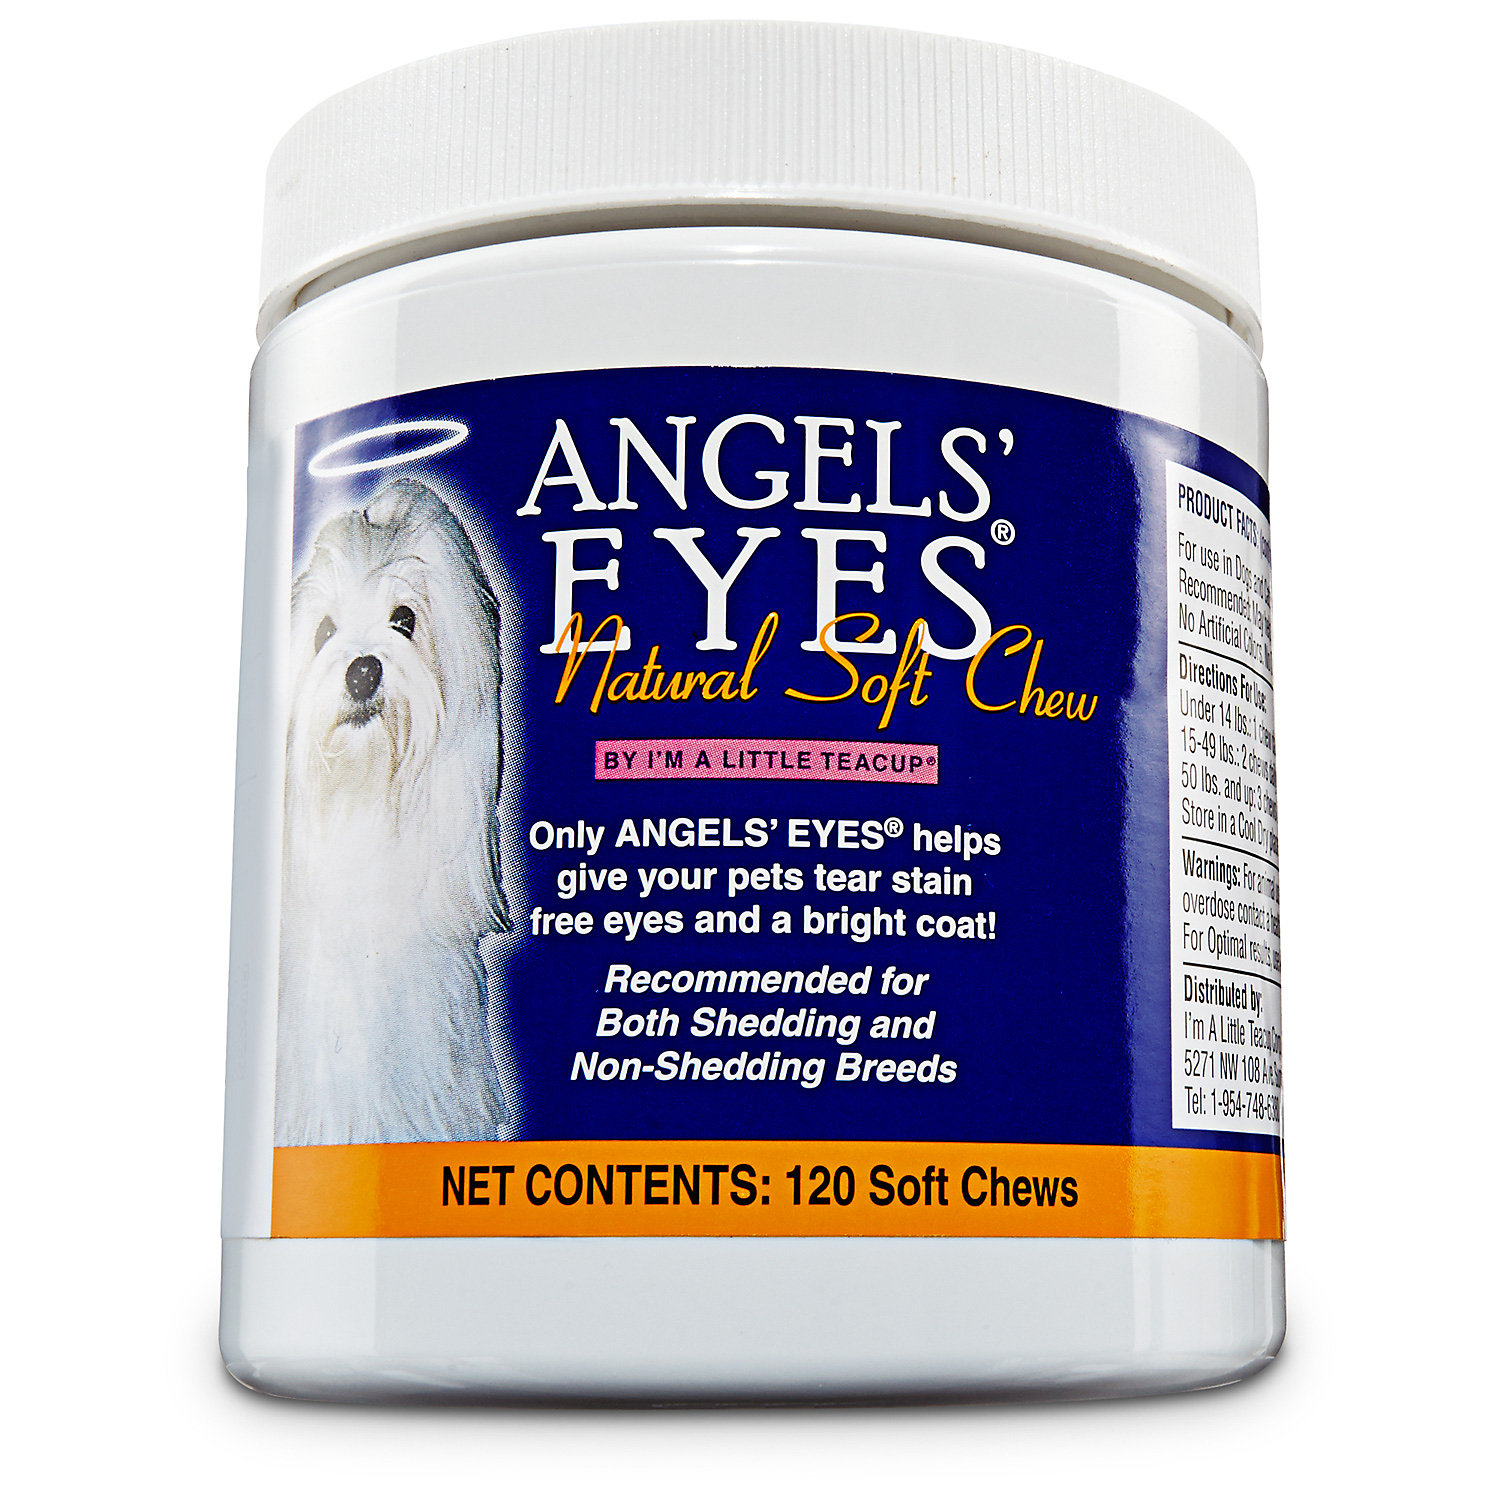 Angels' Eyes Natural Soft Chew Tear Stain Remover